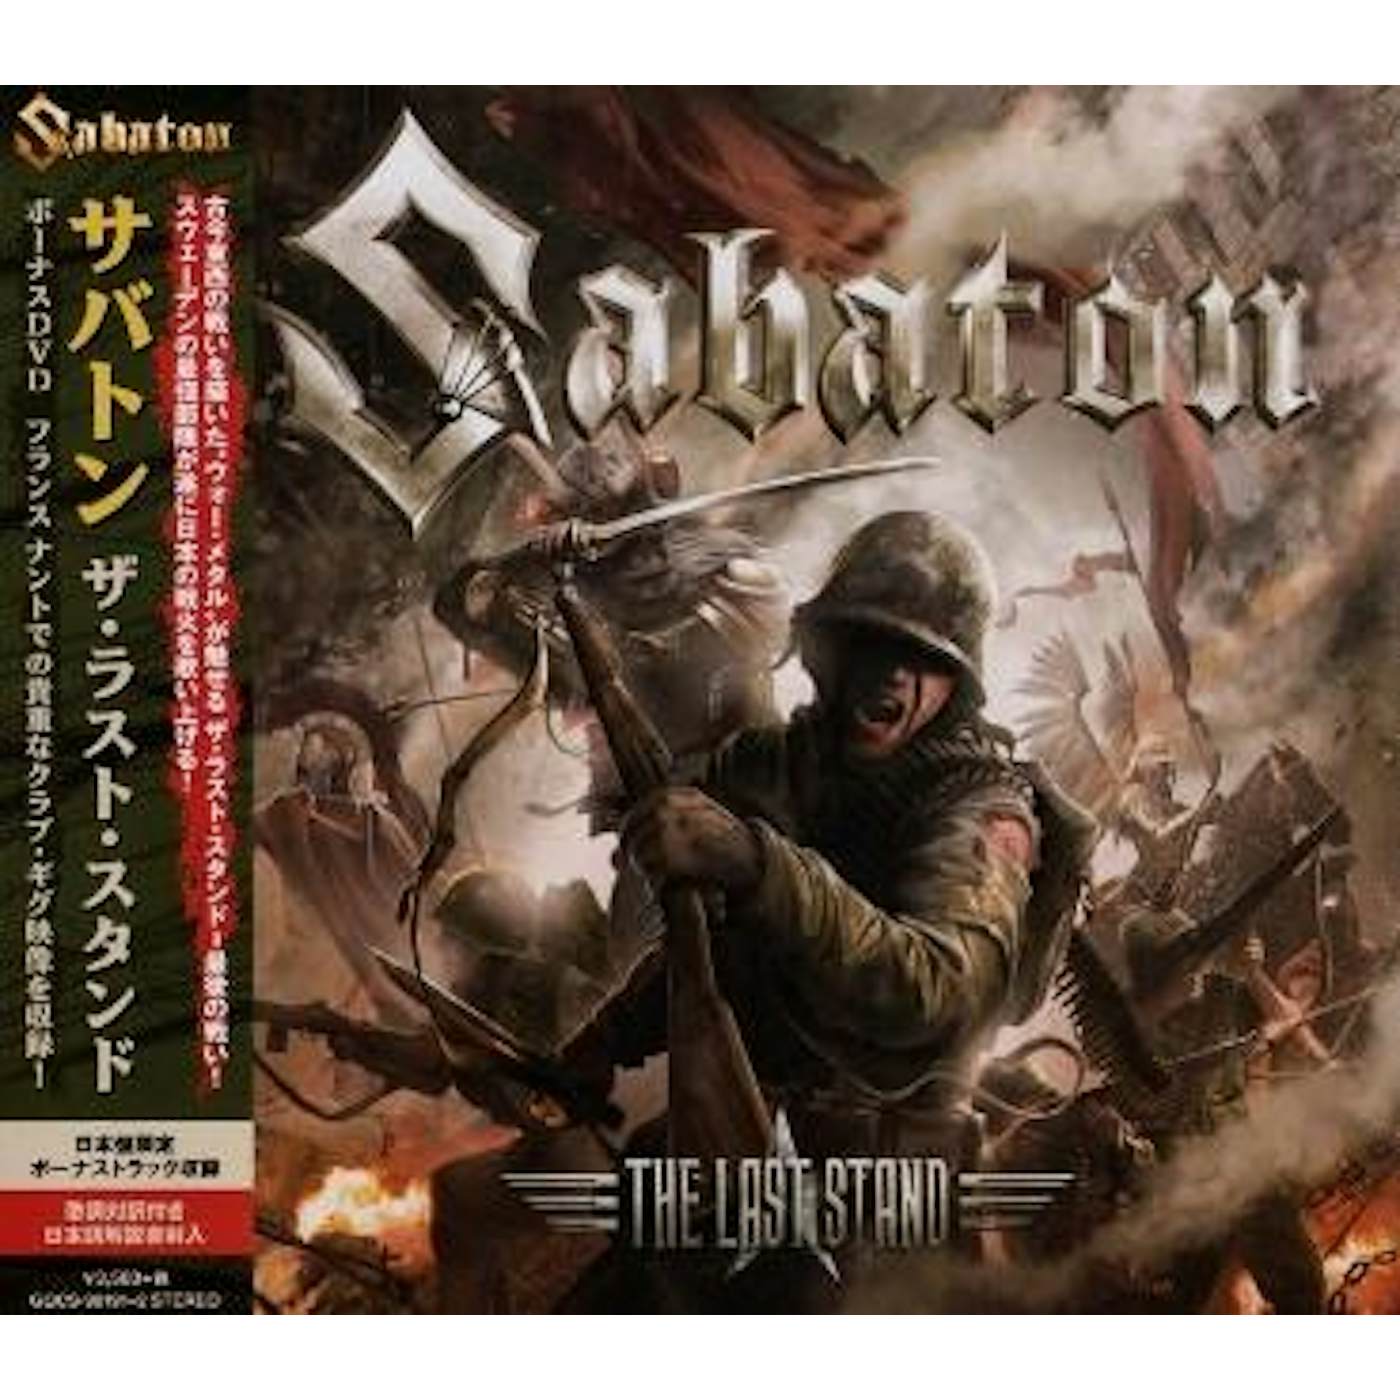 Sabaton LAST STAND (LTD/CD/DVD/BOOKLET) (ONE PRESSING ONLY) CD